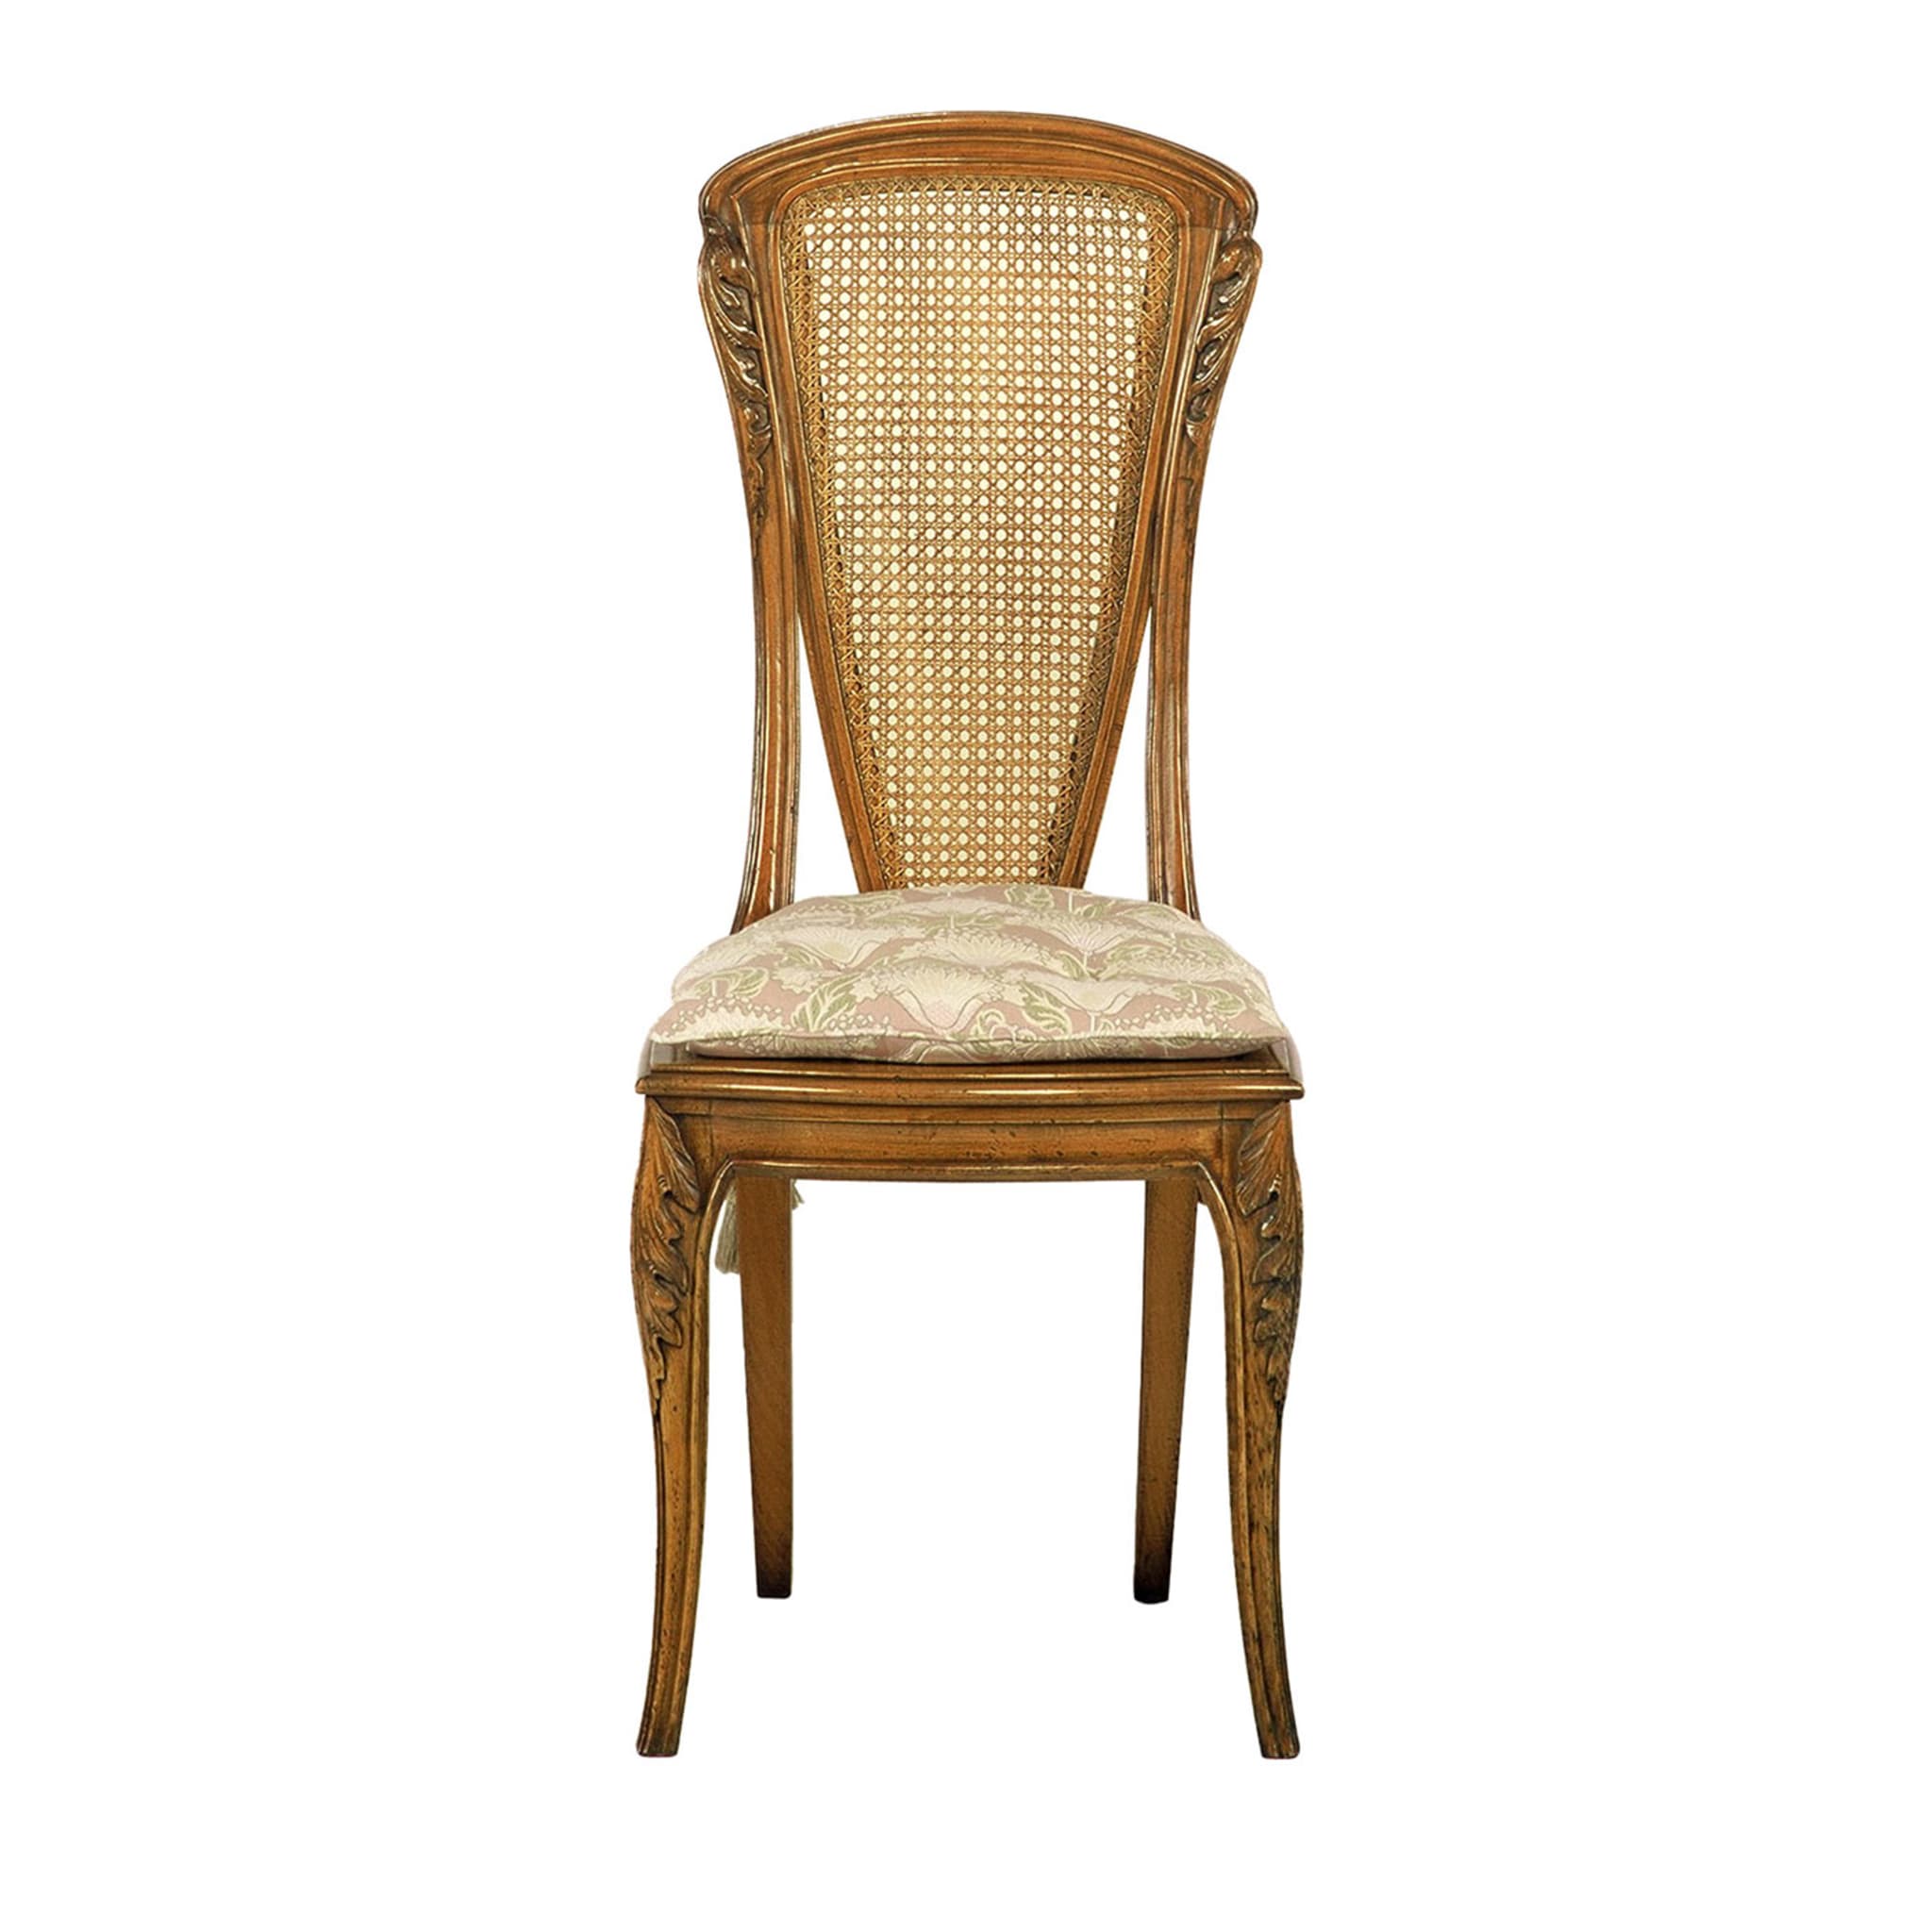 French Art Nouveau-Style Chair by Louis Majorelle - Main view